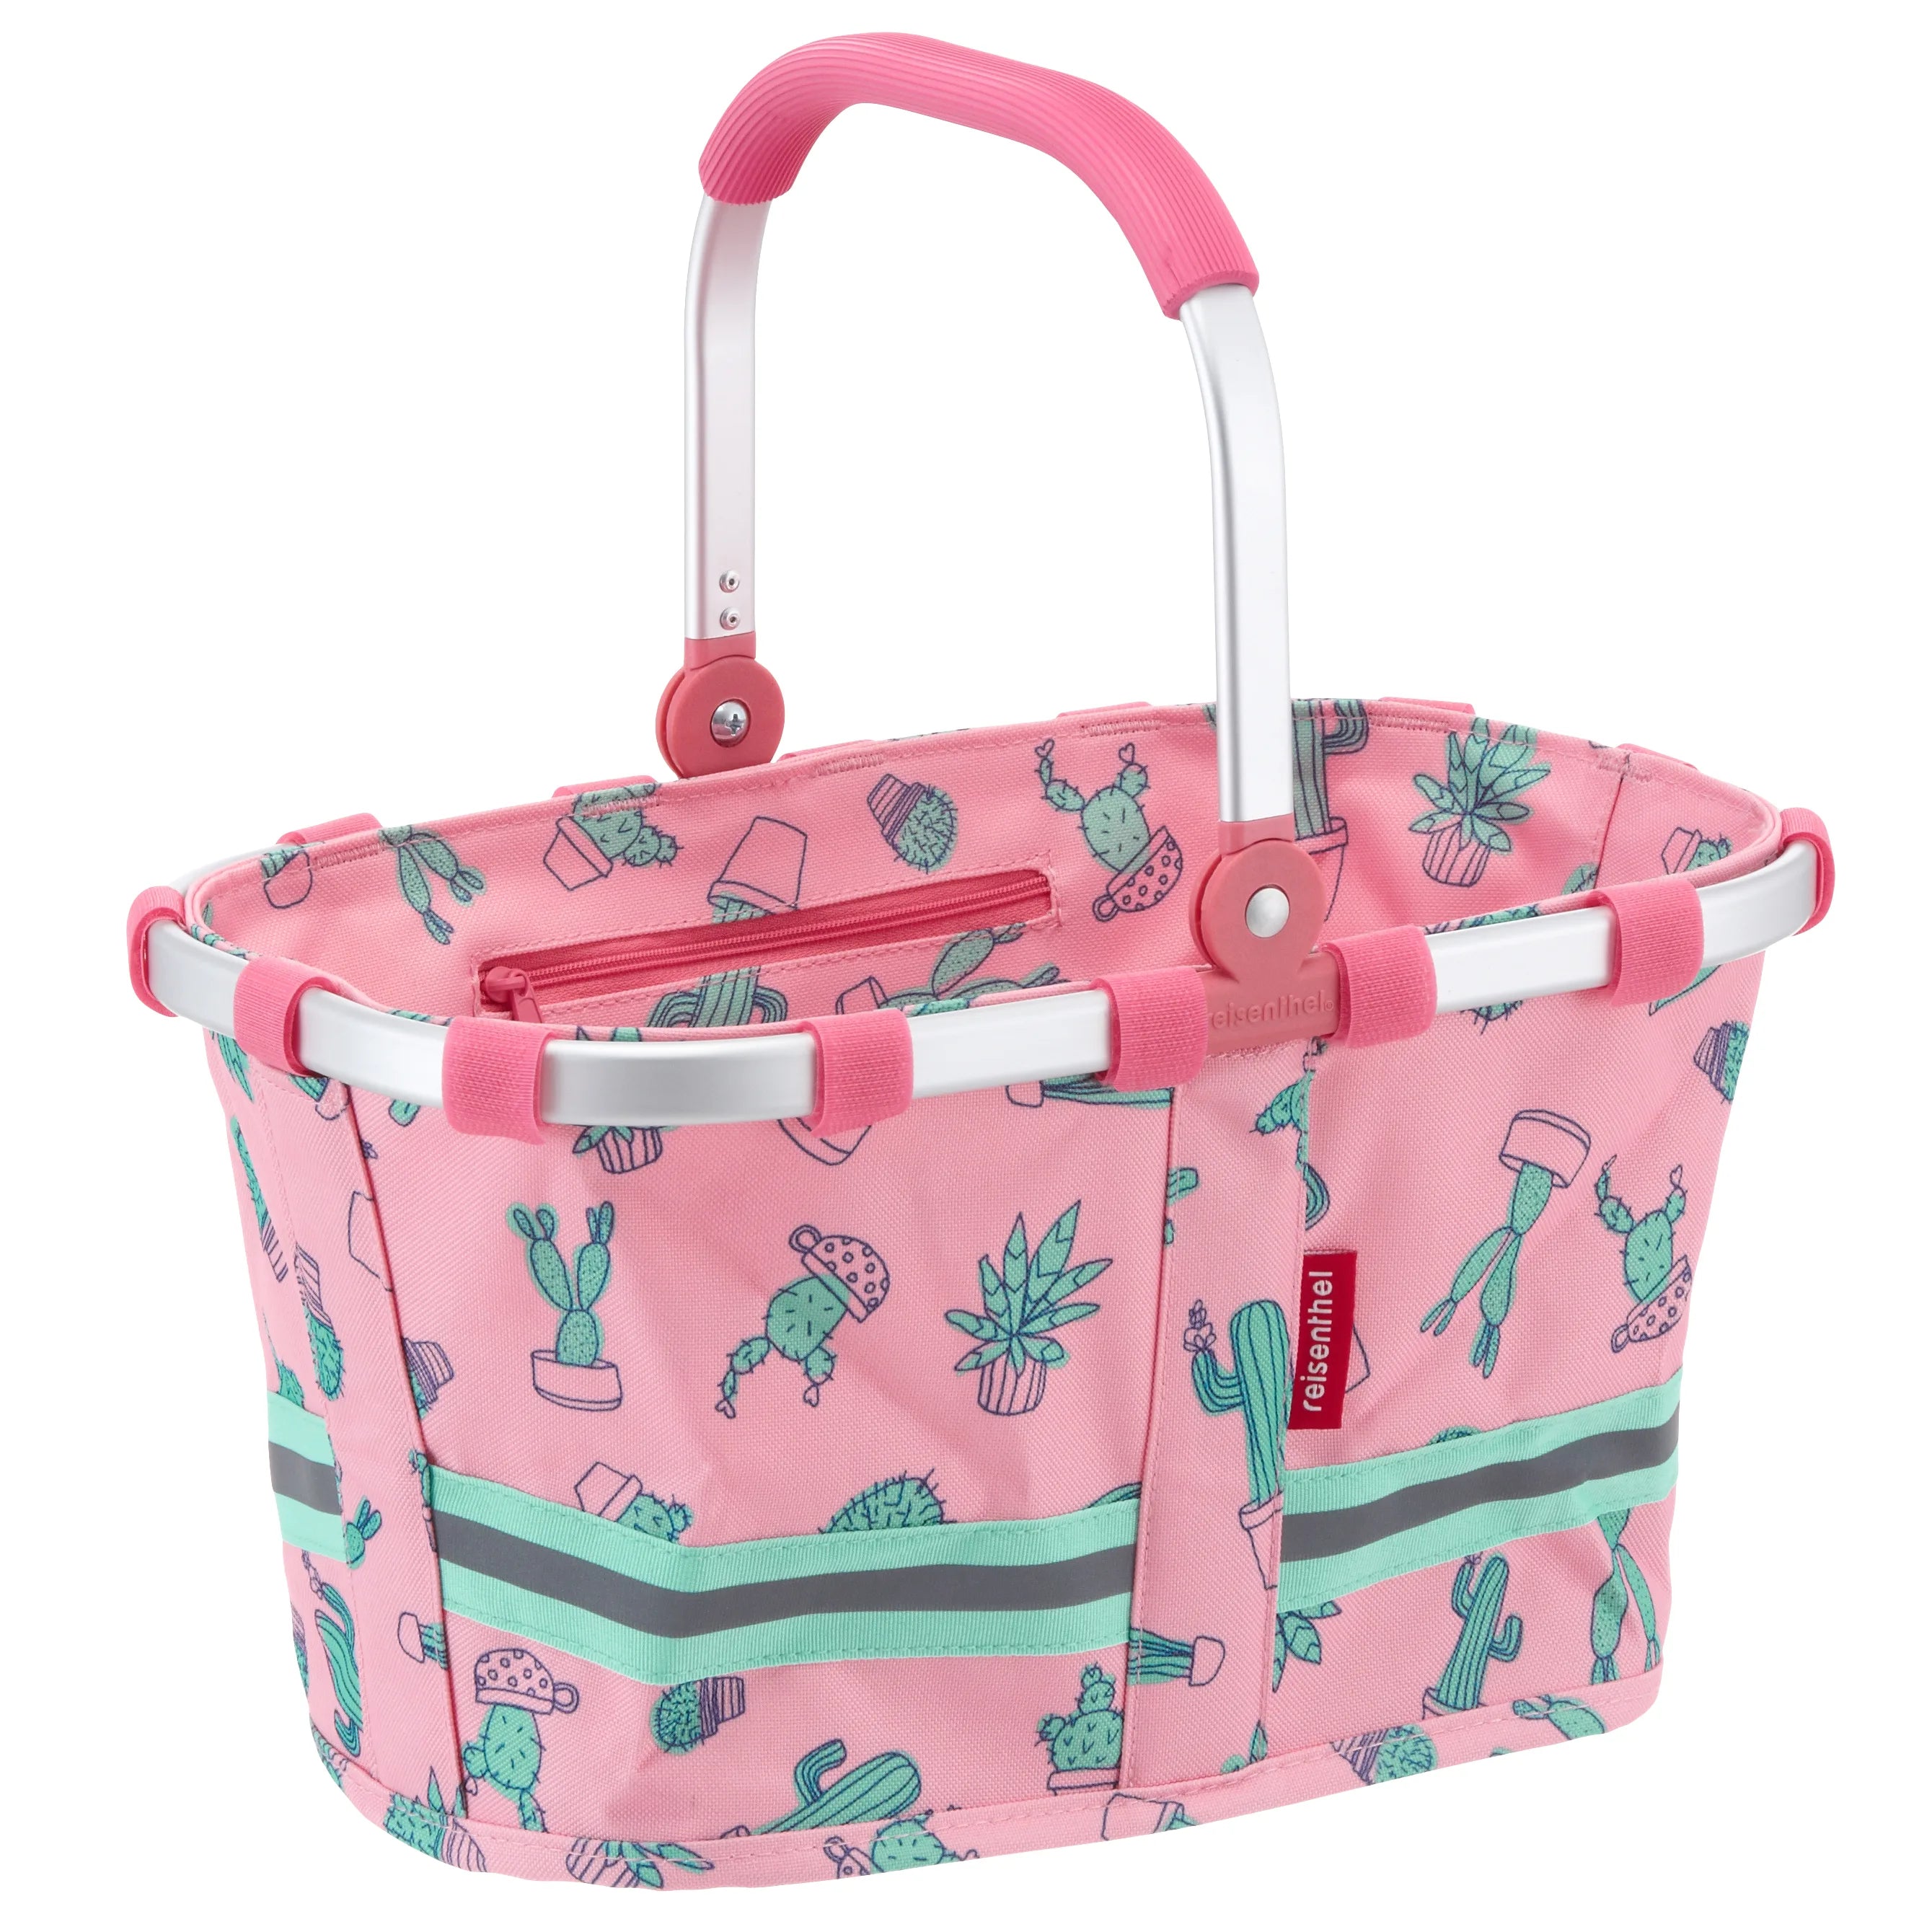 Reisenthel Kids Carrybag XS 33 cm - cats and dogs rose